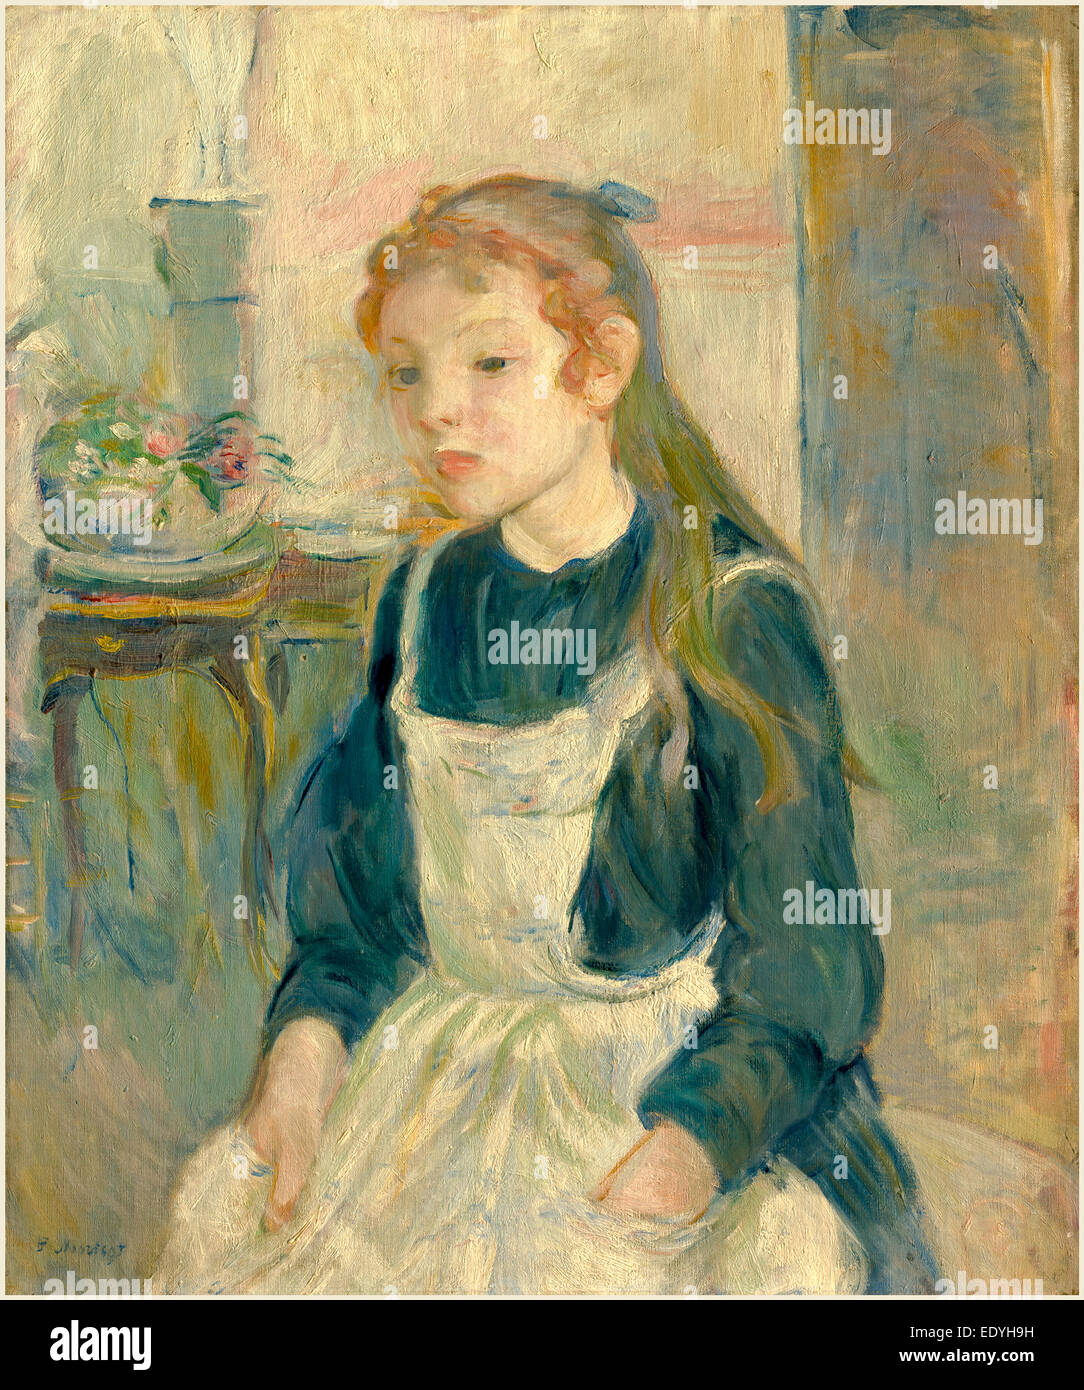 Berthe Morisot, French (1841-1895), Young Girl with an Apron, 1891, oil on canvas Stock Photo